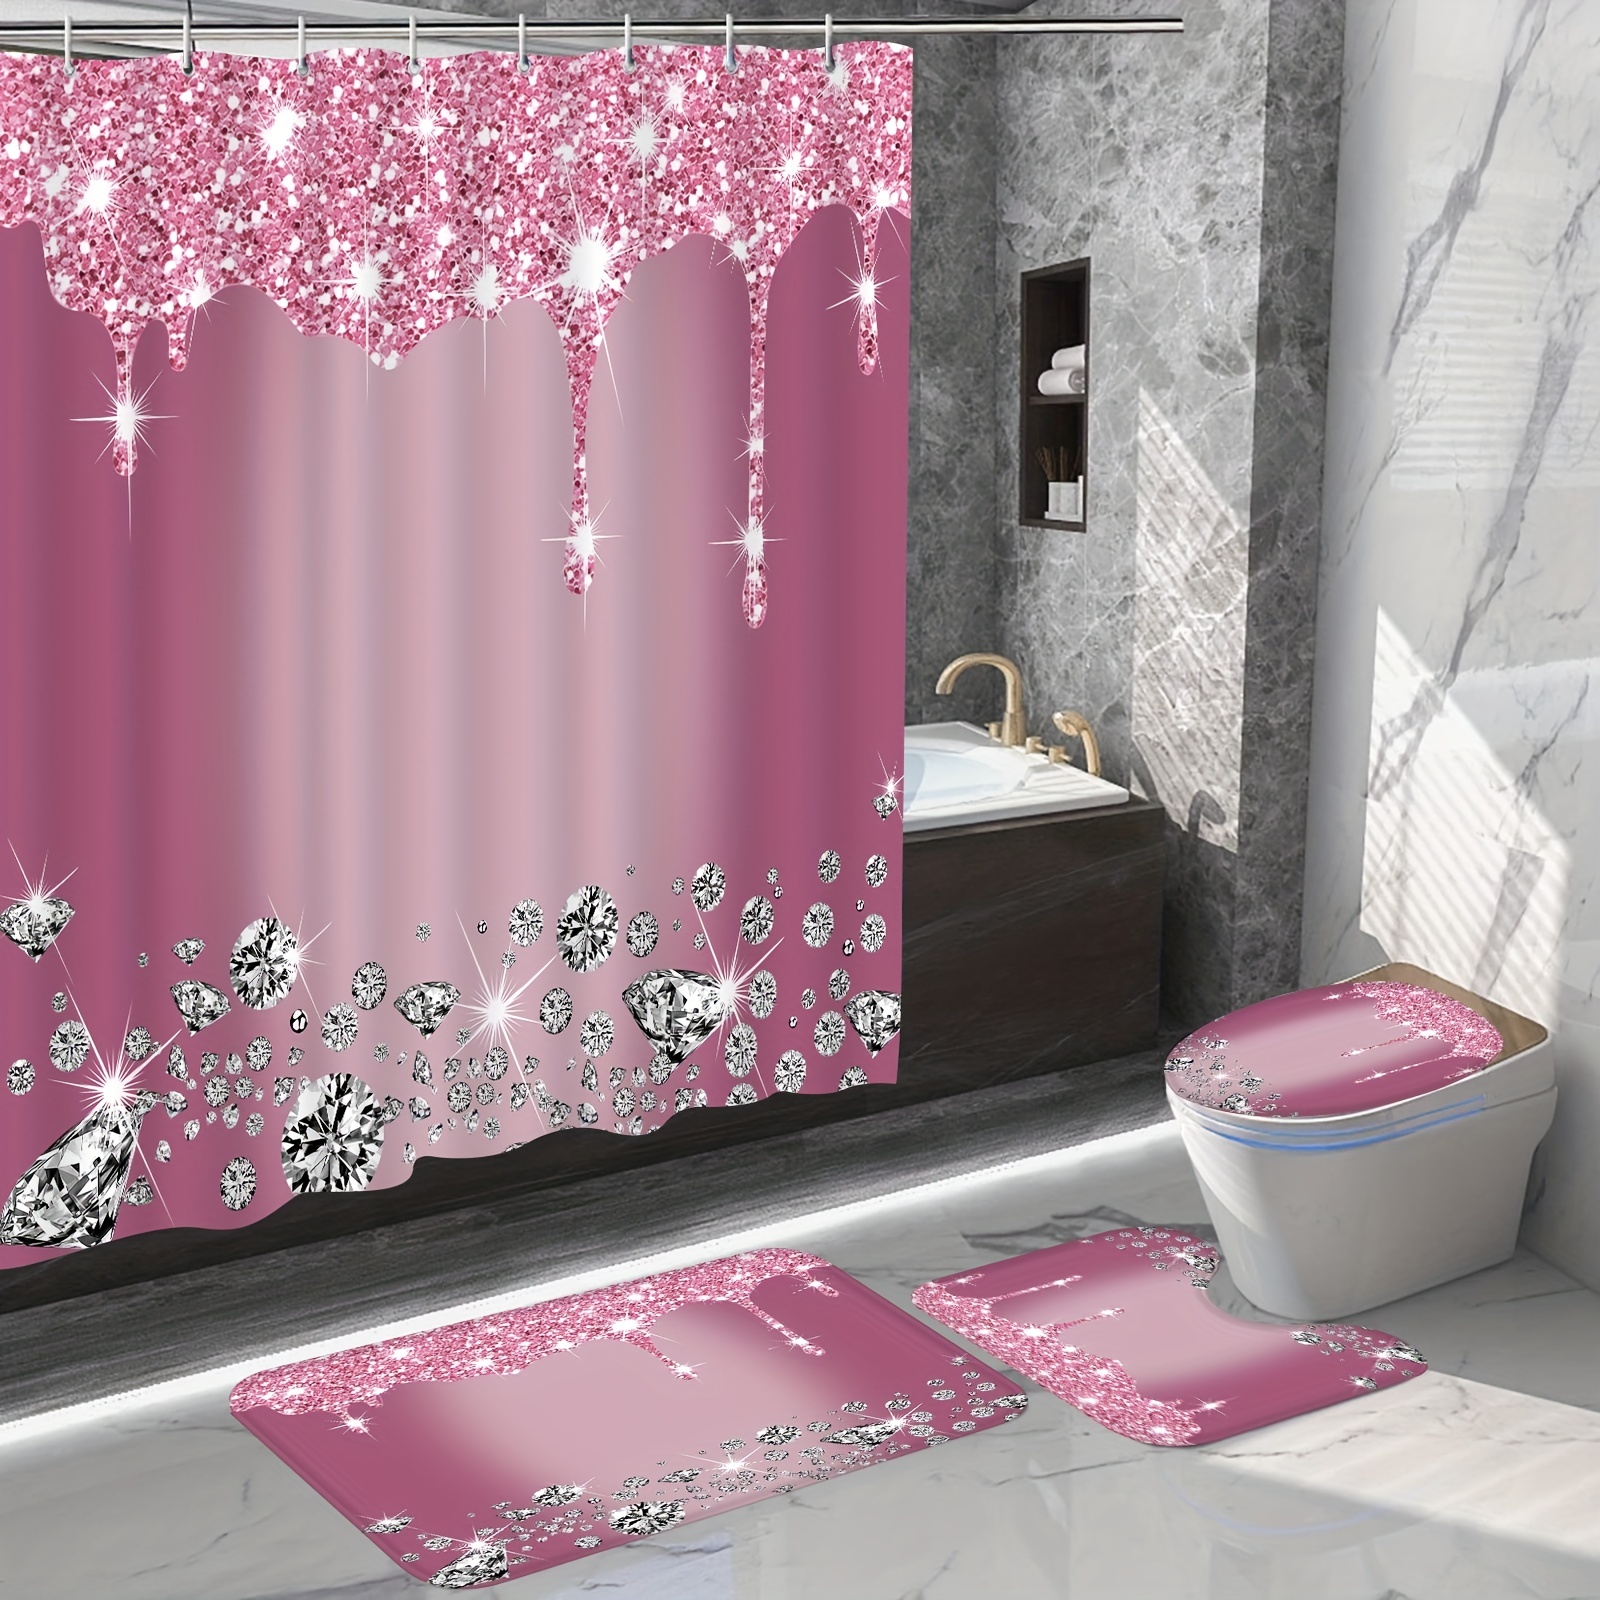  TERLYTEX Silver Shower Curtain Pink - Metallic Silver Foil  Glitter Shower Curtains for Bathroom, Soft Glam Sparkle Shower Curtain 72  Inch Length 12 Hooks Included, 72 x 72 Inch, Silver Pink : Home & Kitchen